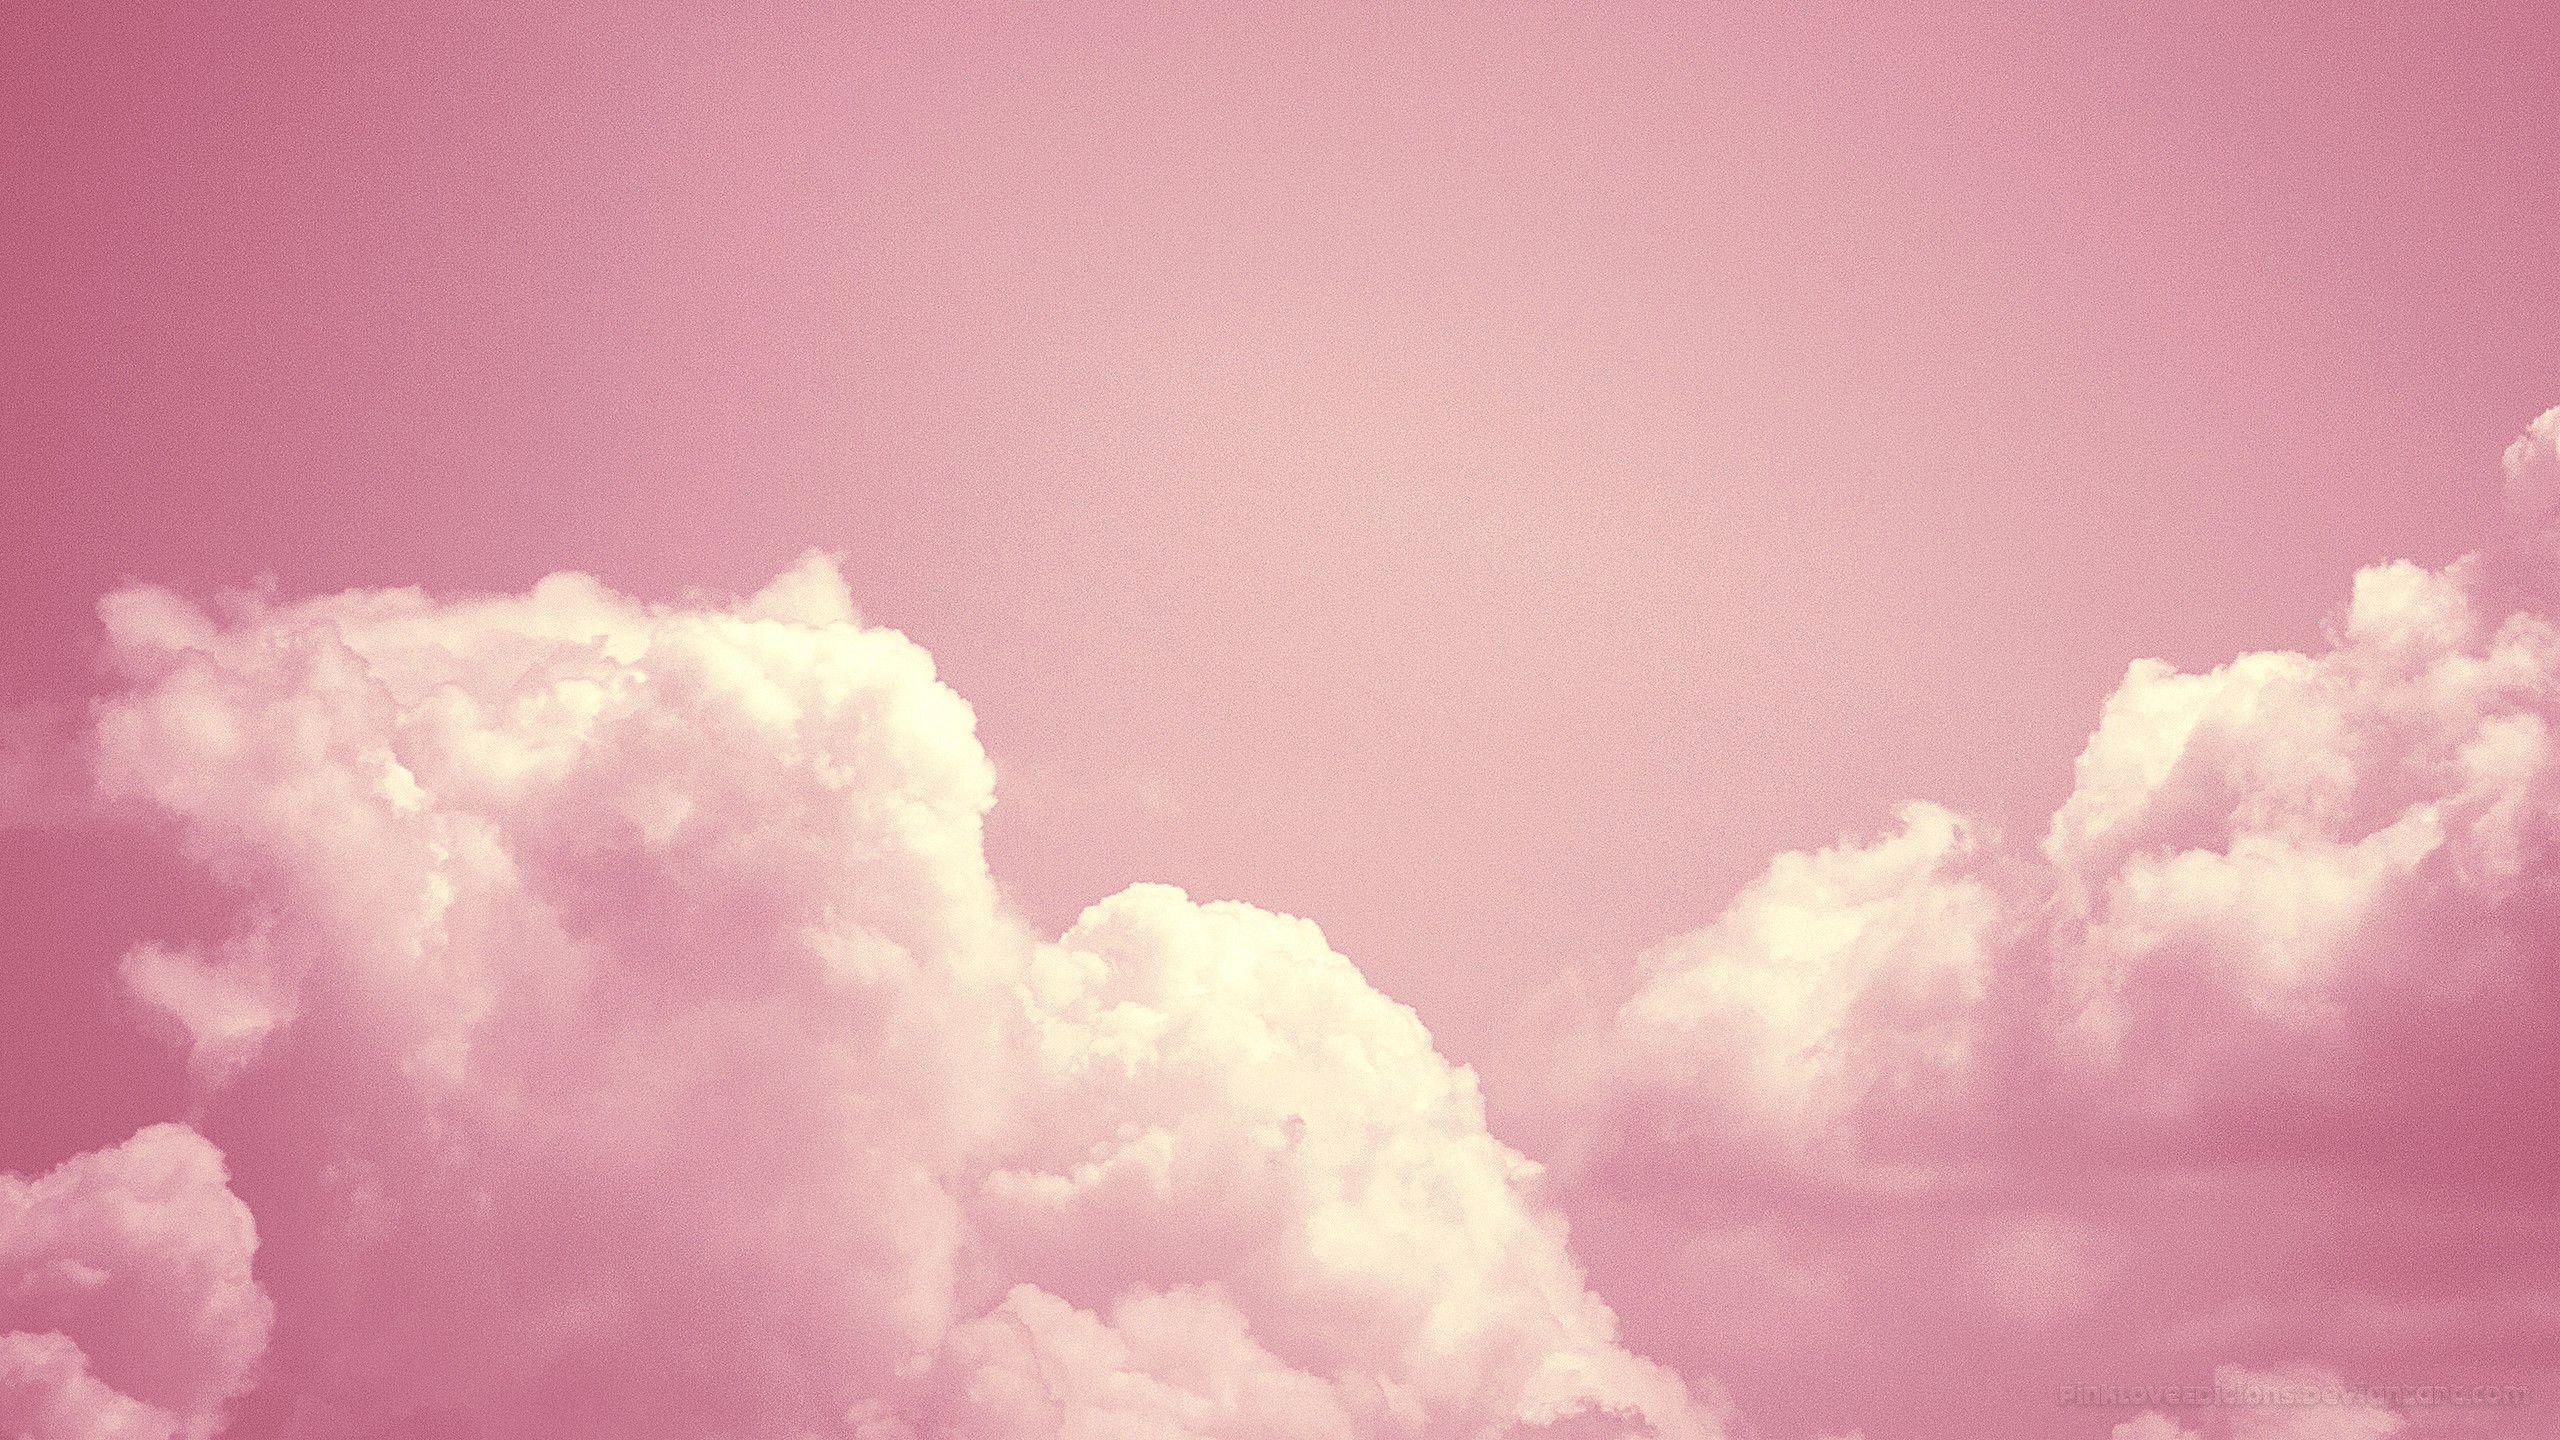 Pink Aesthetic Tumblr Computer Wallpapers Top Free Pink Aesthetic Tumblr Computer Backgrounds